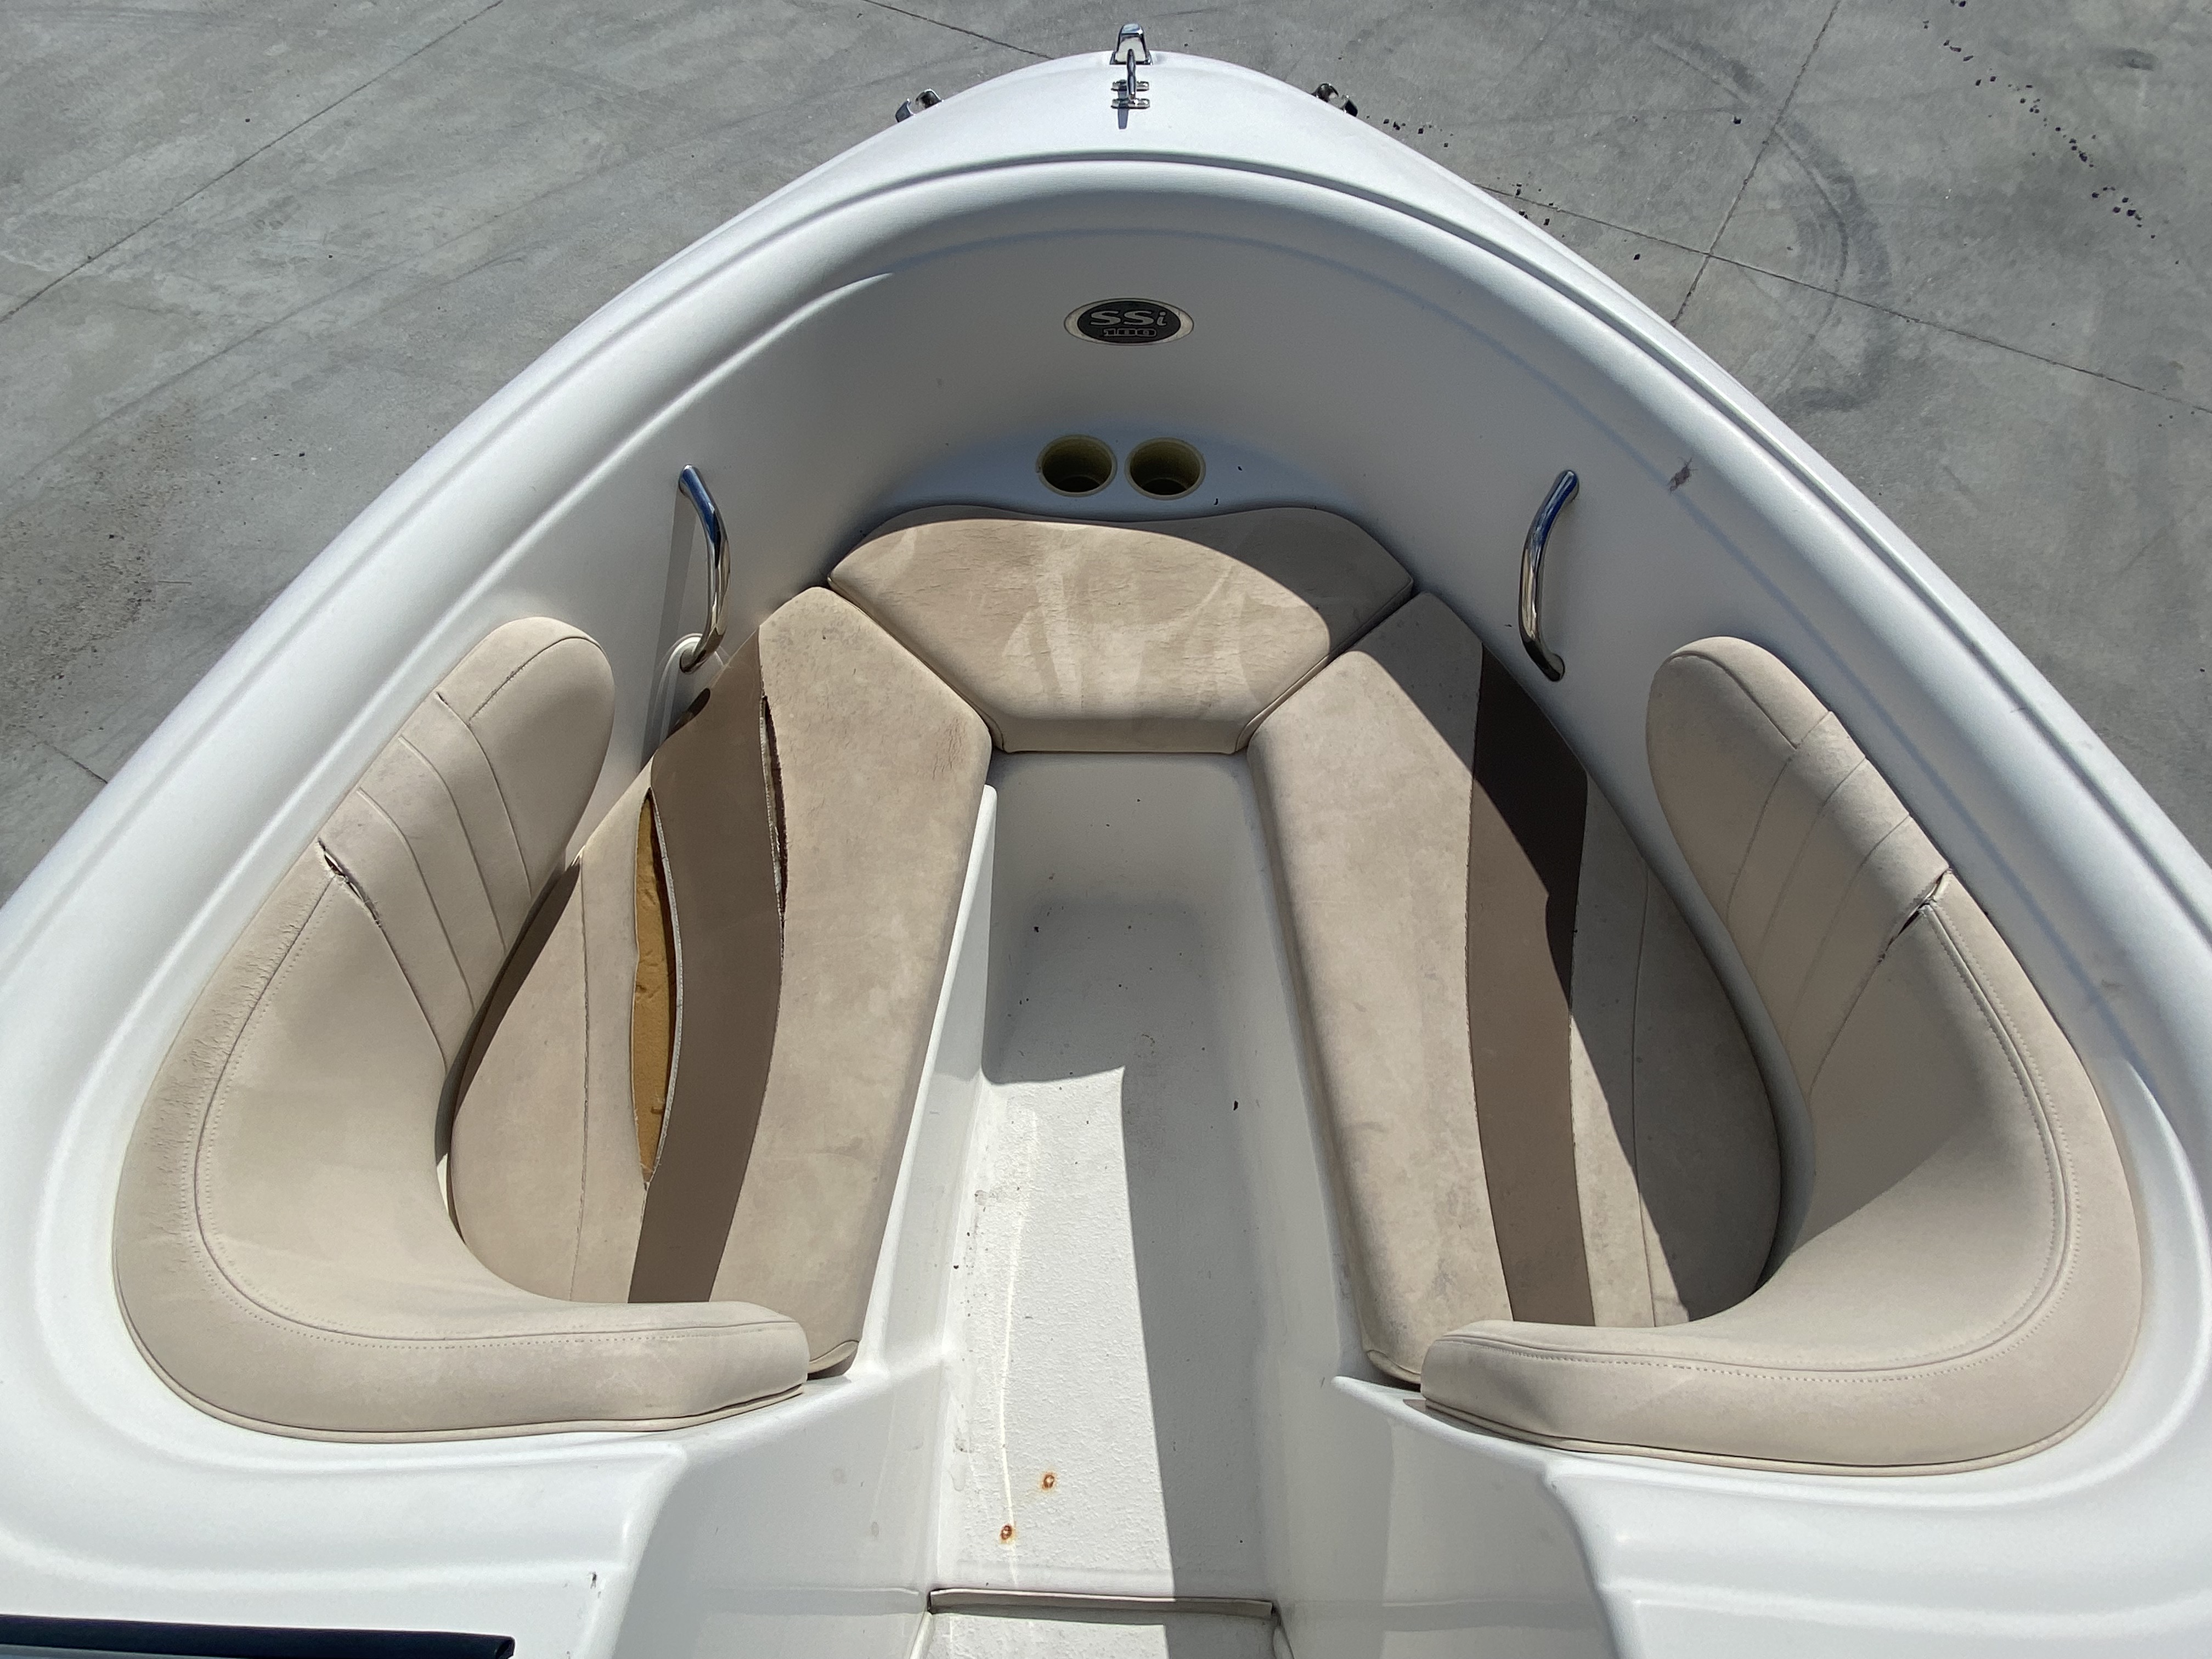 2008 Chaparral boat for sale, model of the boat is 180 SSi & Image # 8 of 10